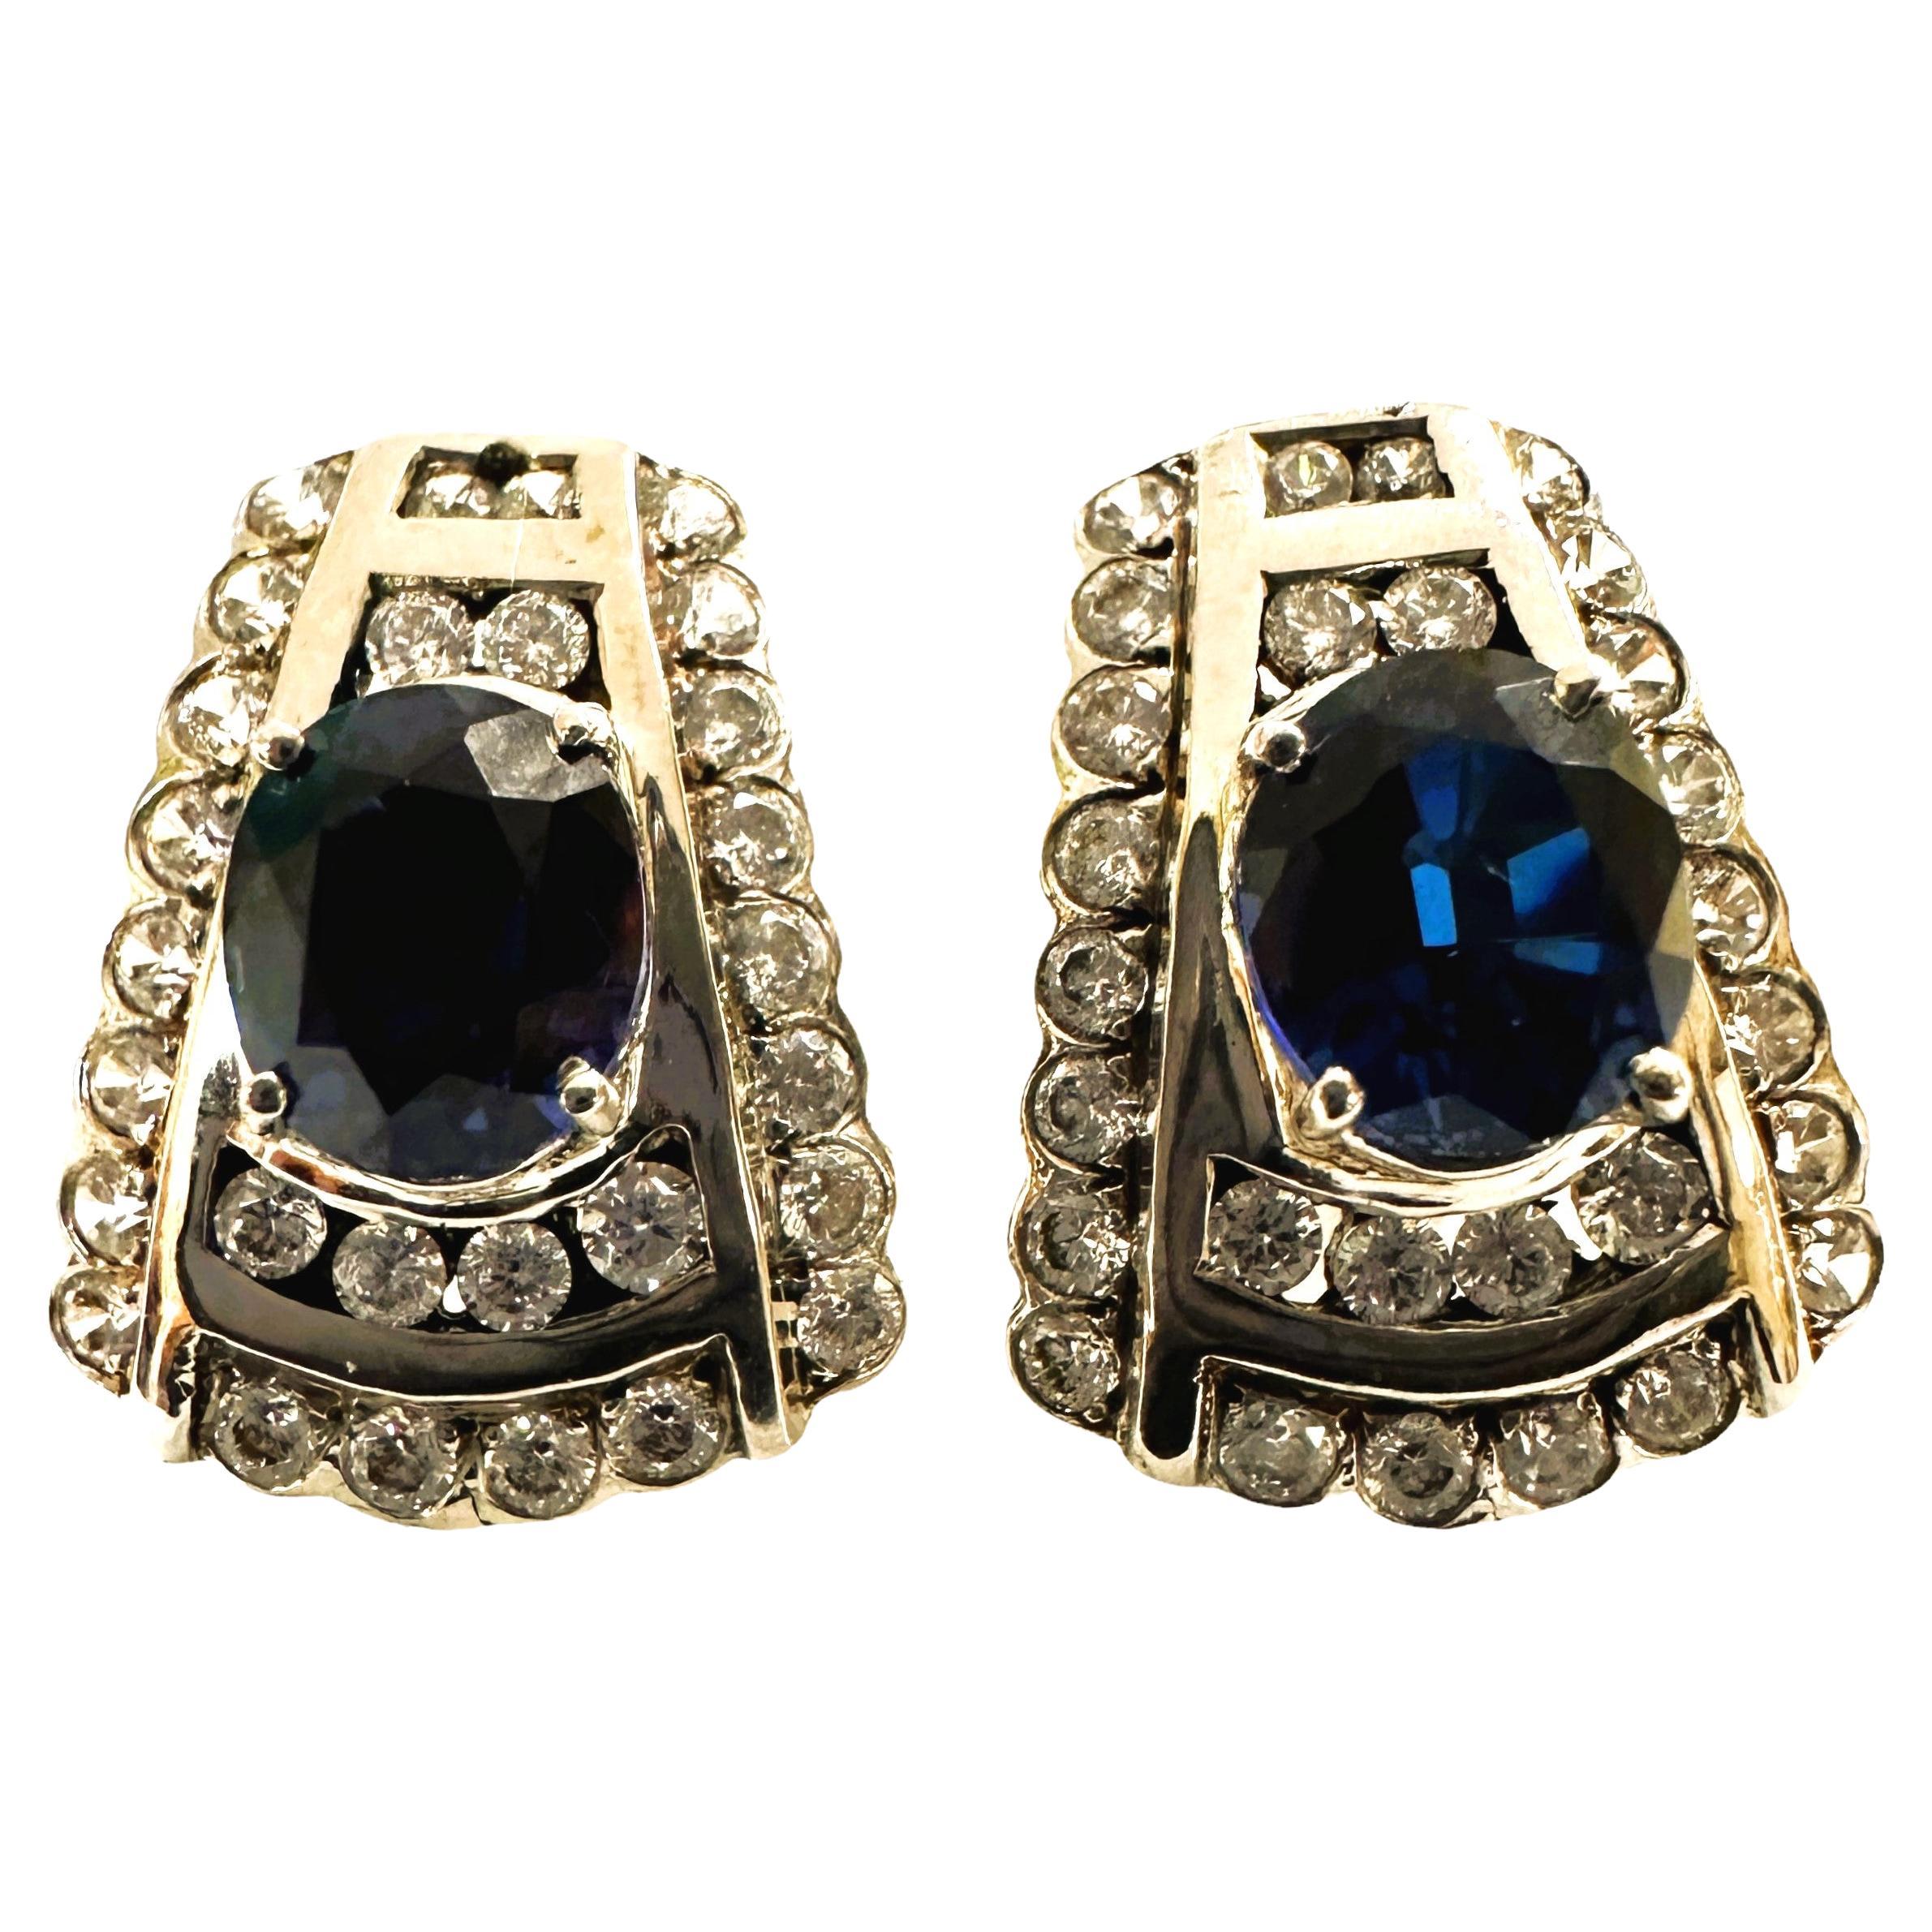 New African 4. ct Deep Blue Sapphire & White Sterling Post Earrings